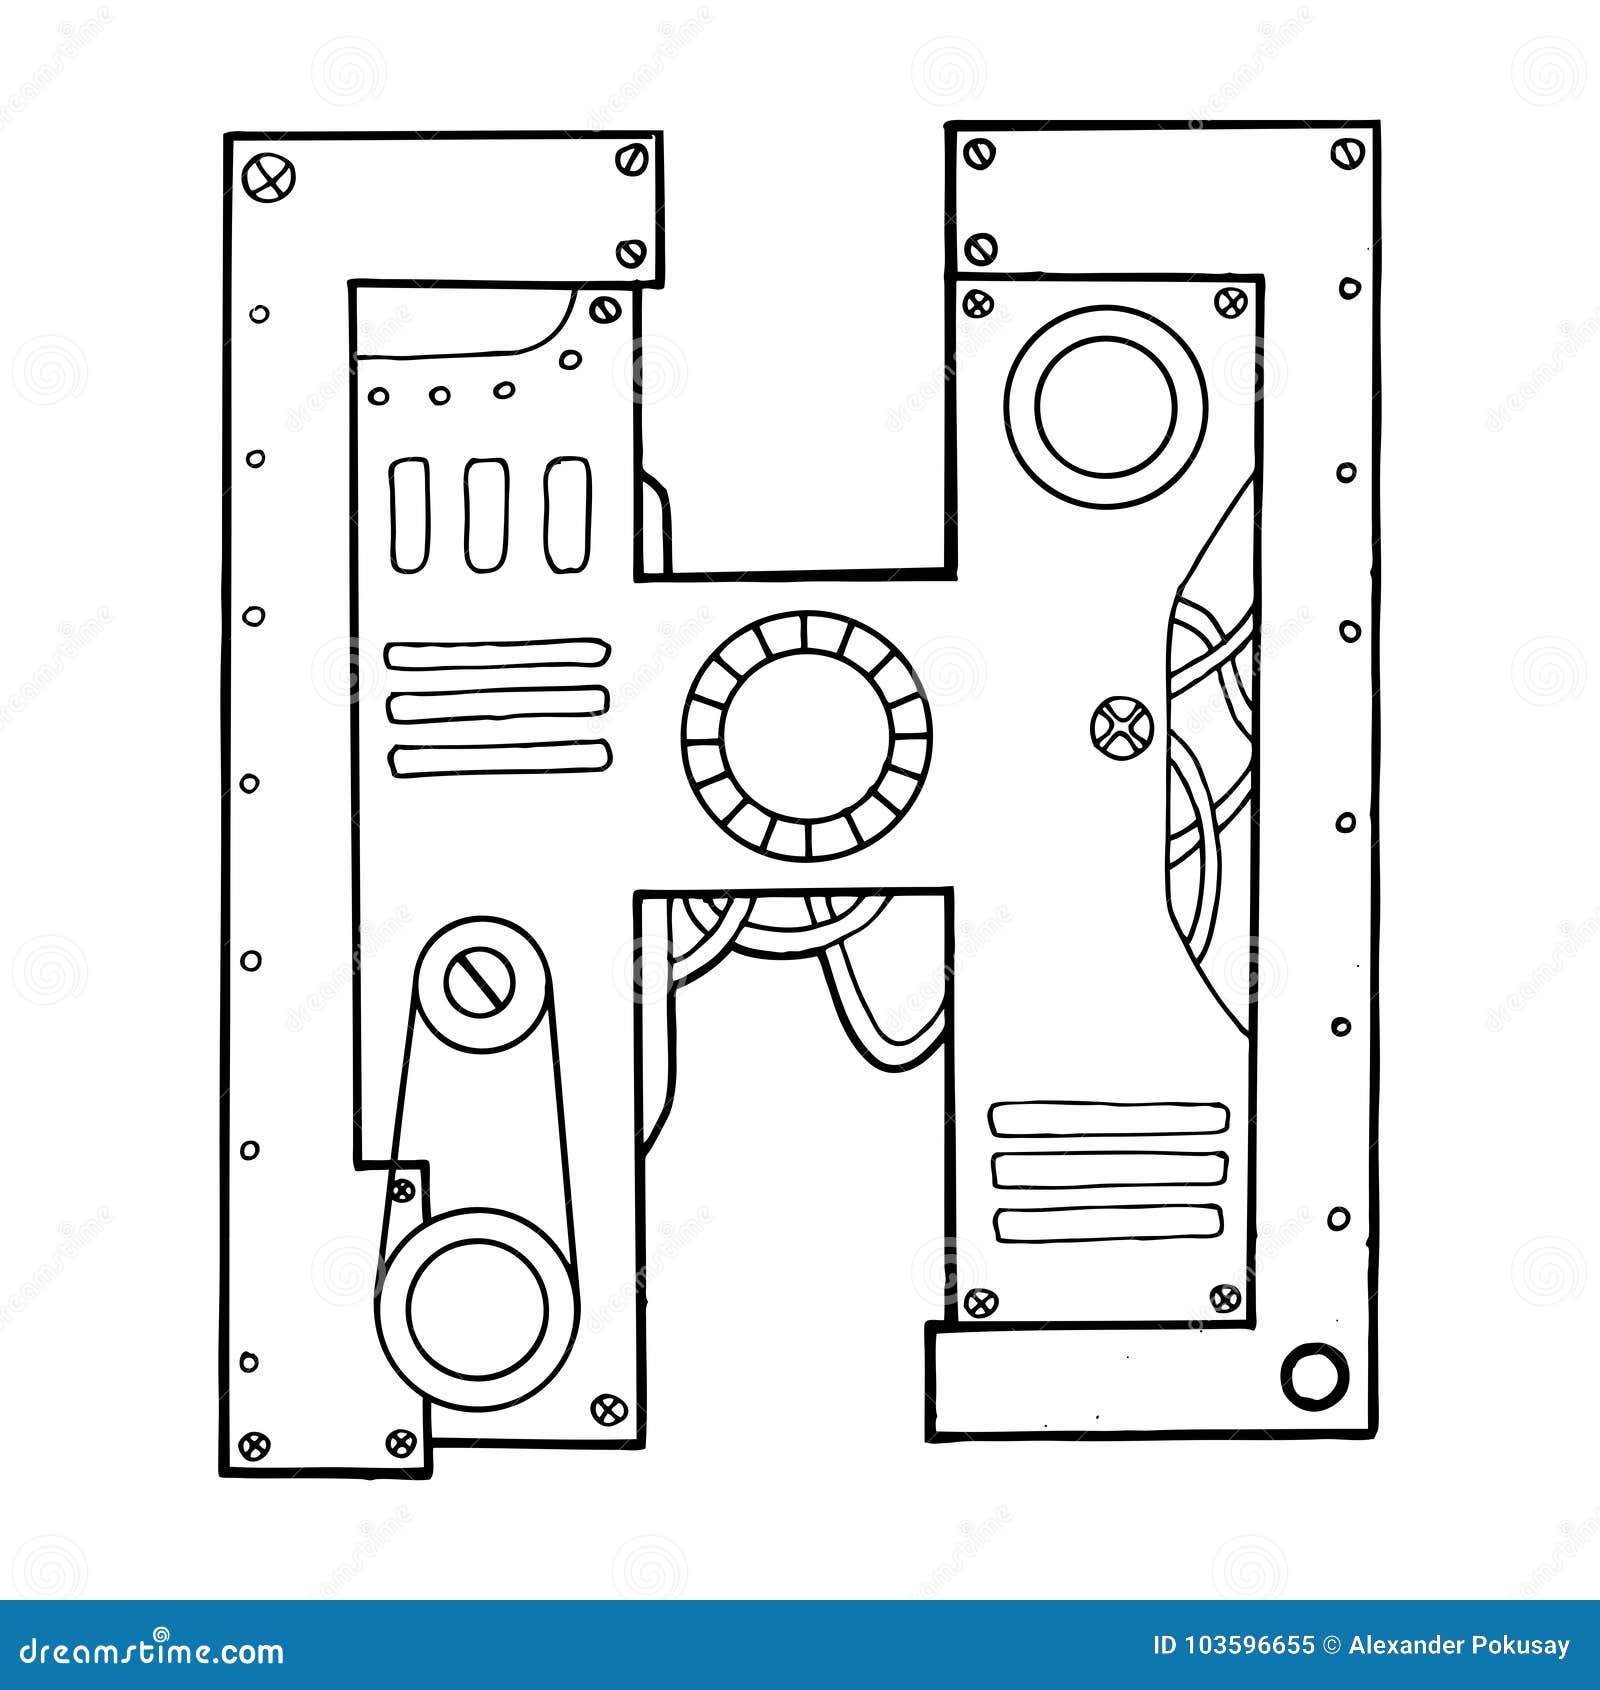 Old mechanic sewing machine sketch engraving vector illustration. Scratch  board style imitation. Black and white hand drawn image. Stock Vector